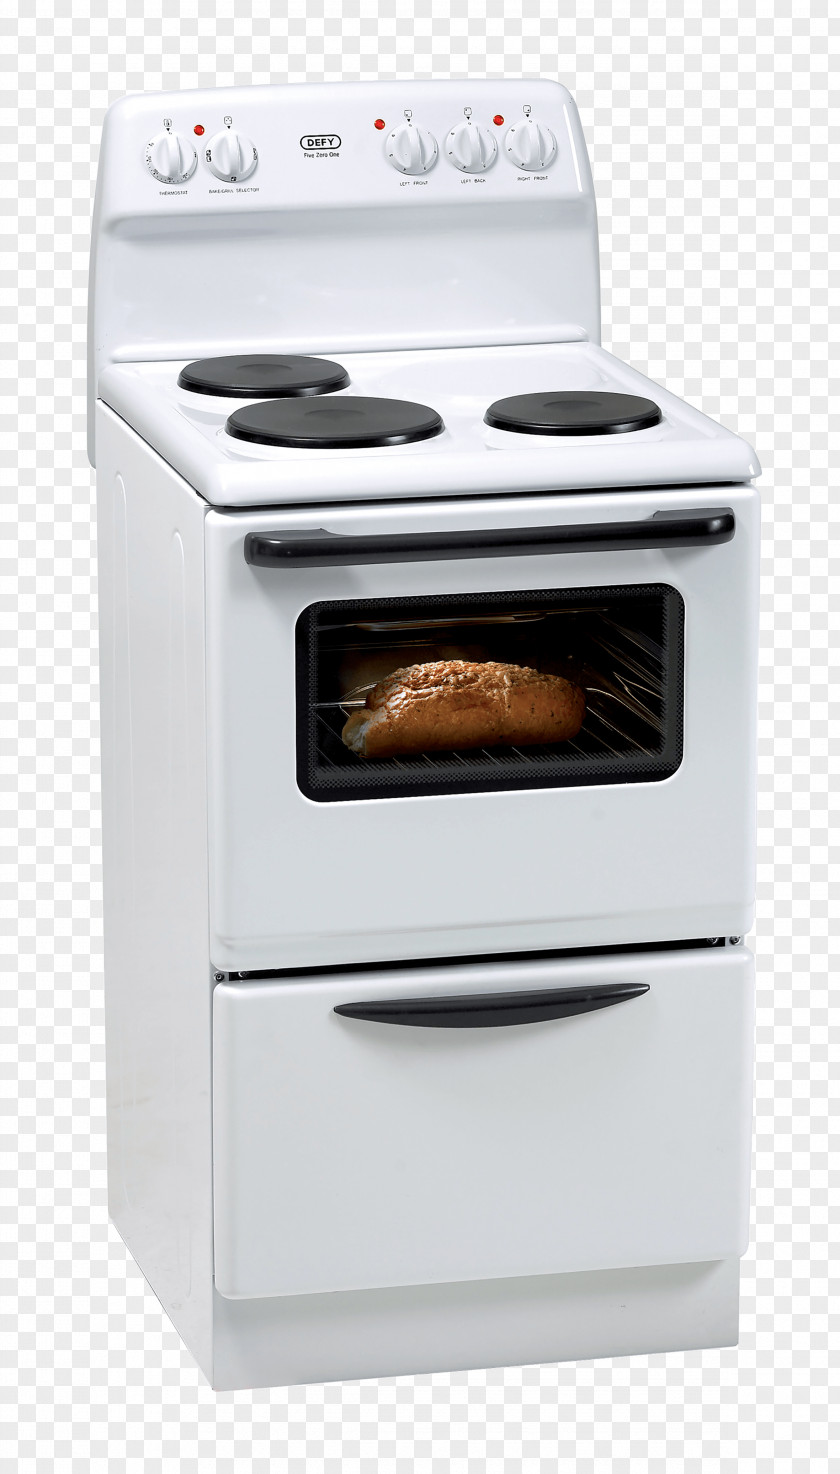 Stove Gas Cooking Ranges Hob Oven PNG